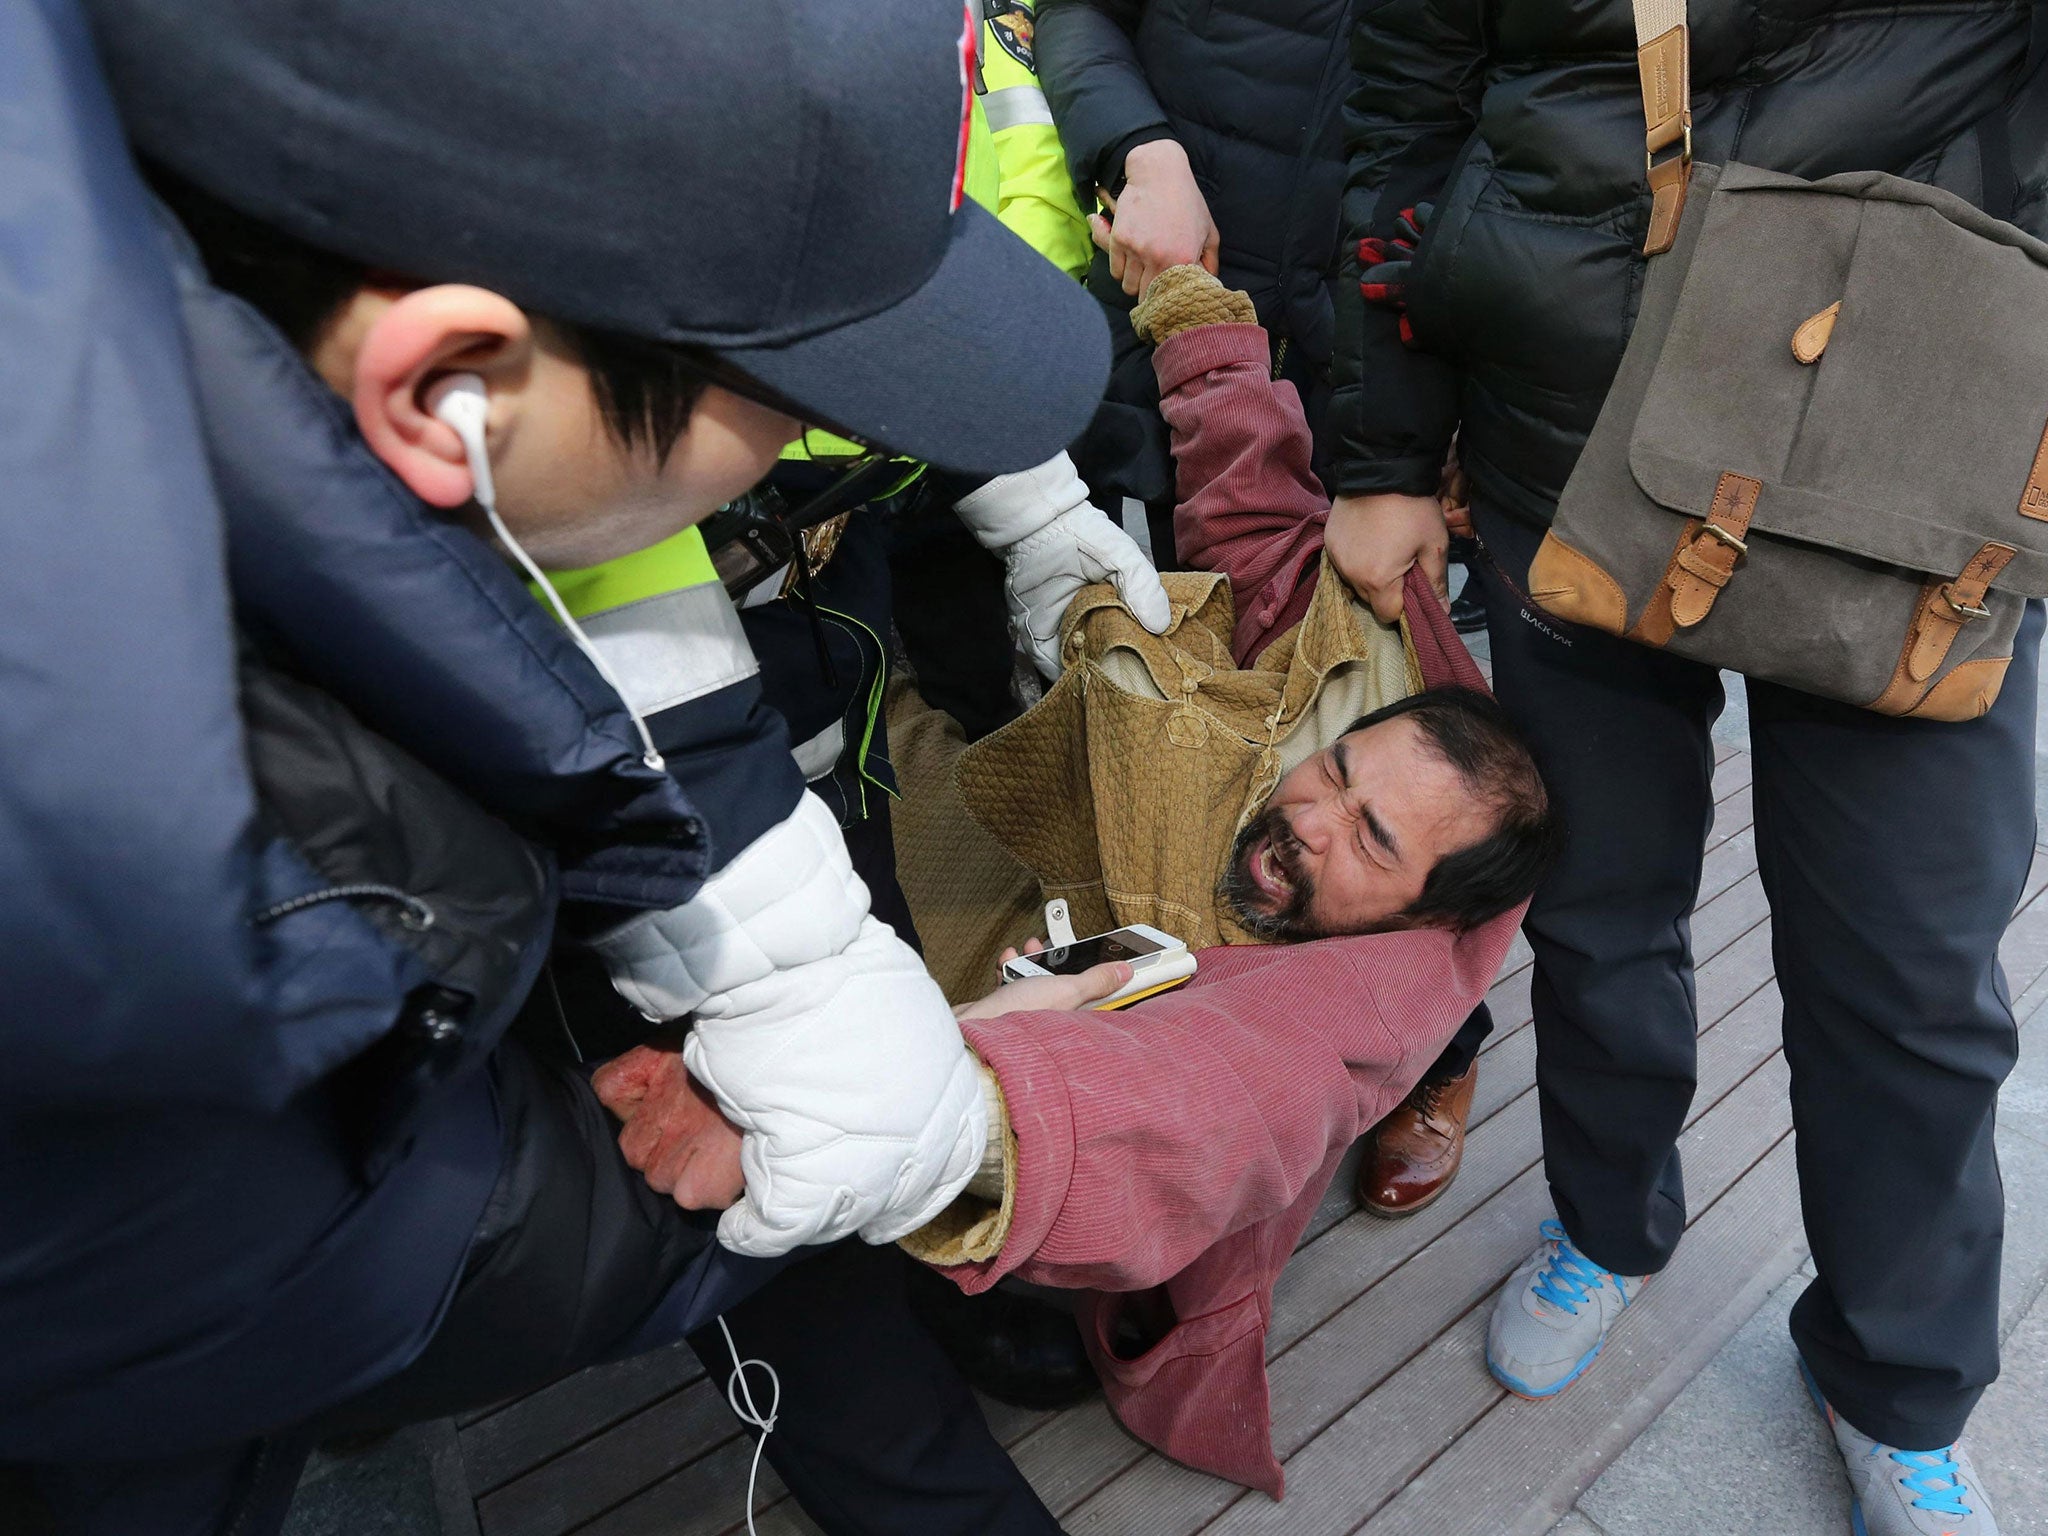 Security services detain the suspect, identified as 55-year-old Kim Ki-jong